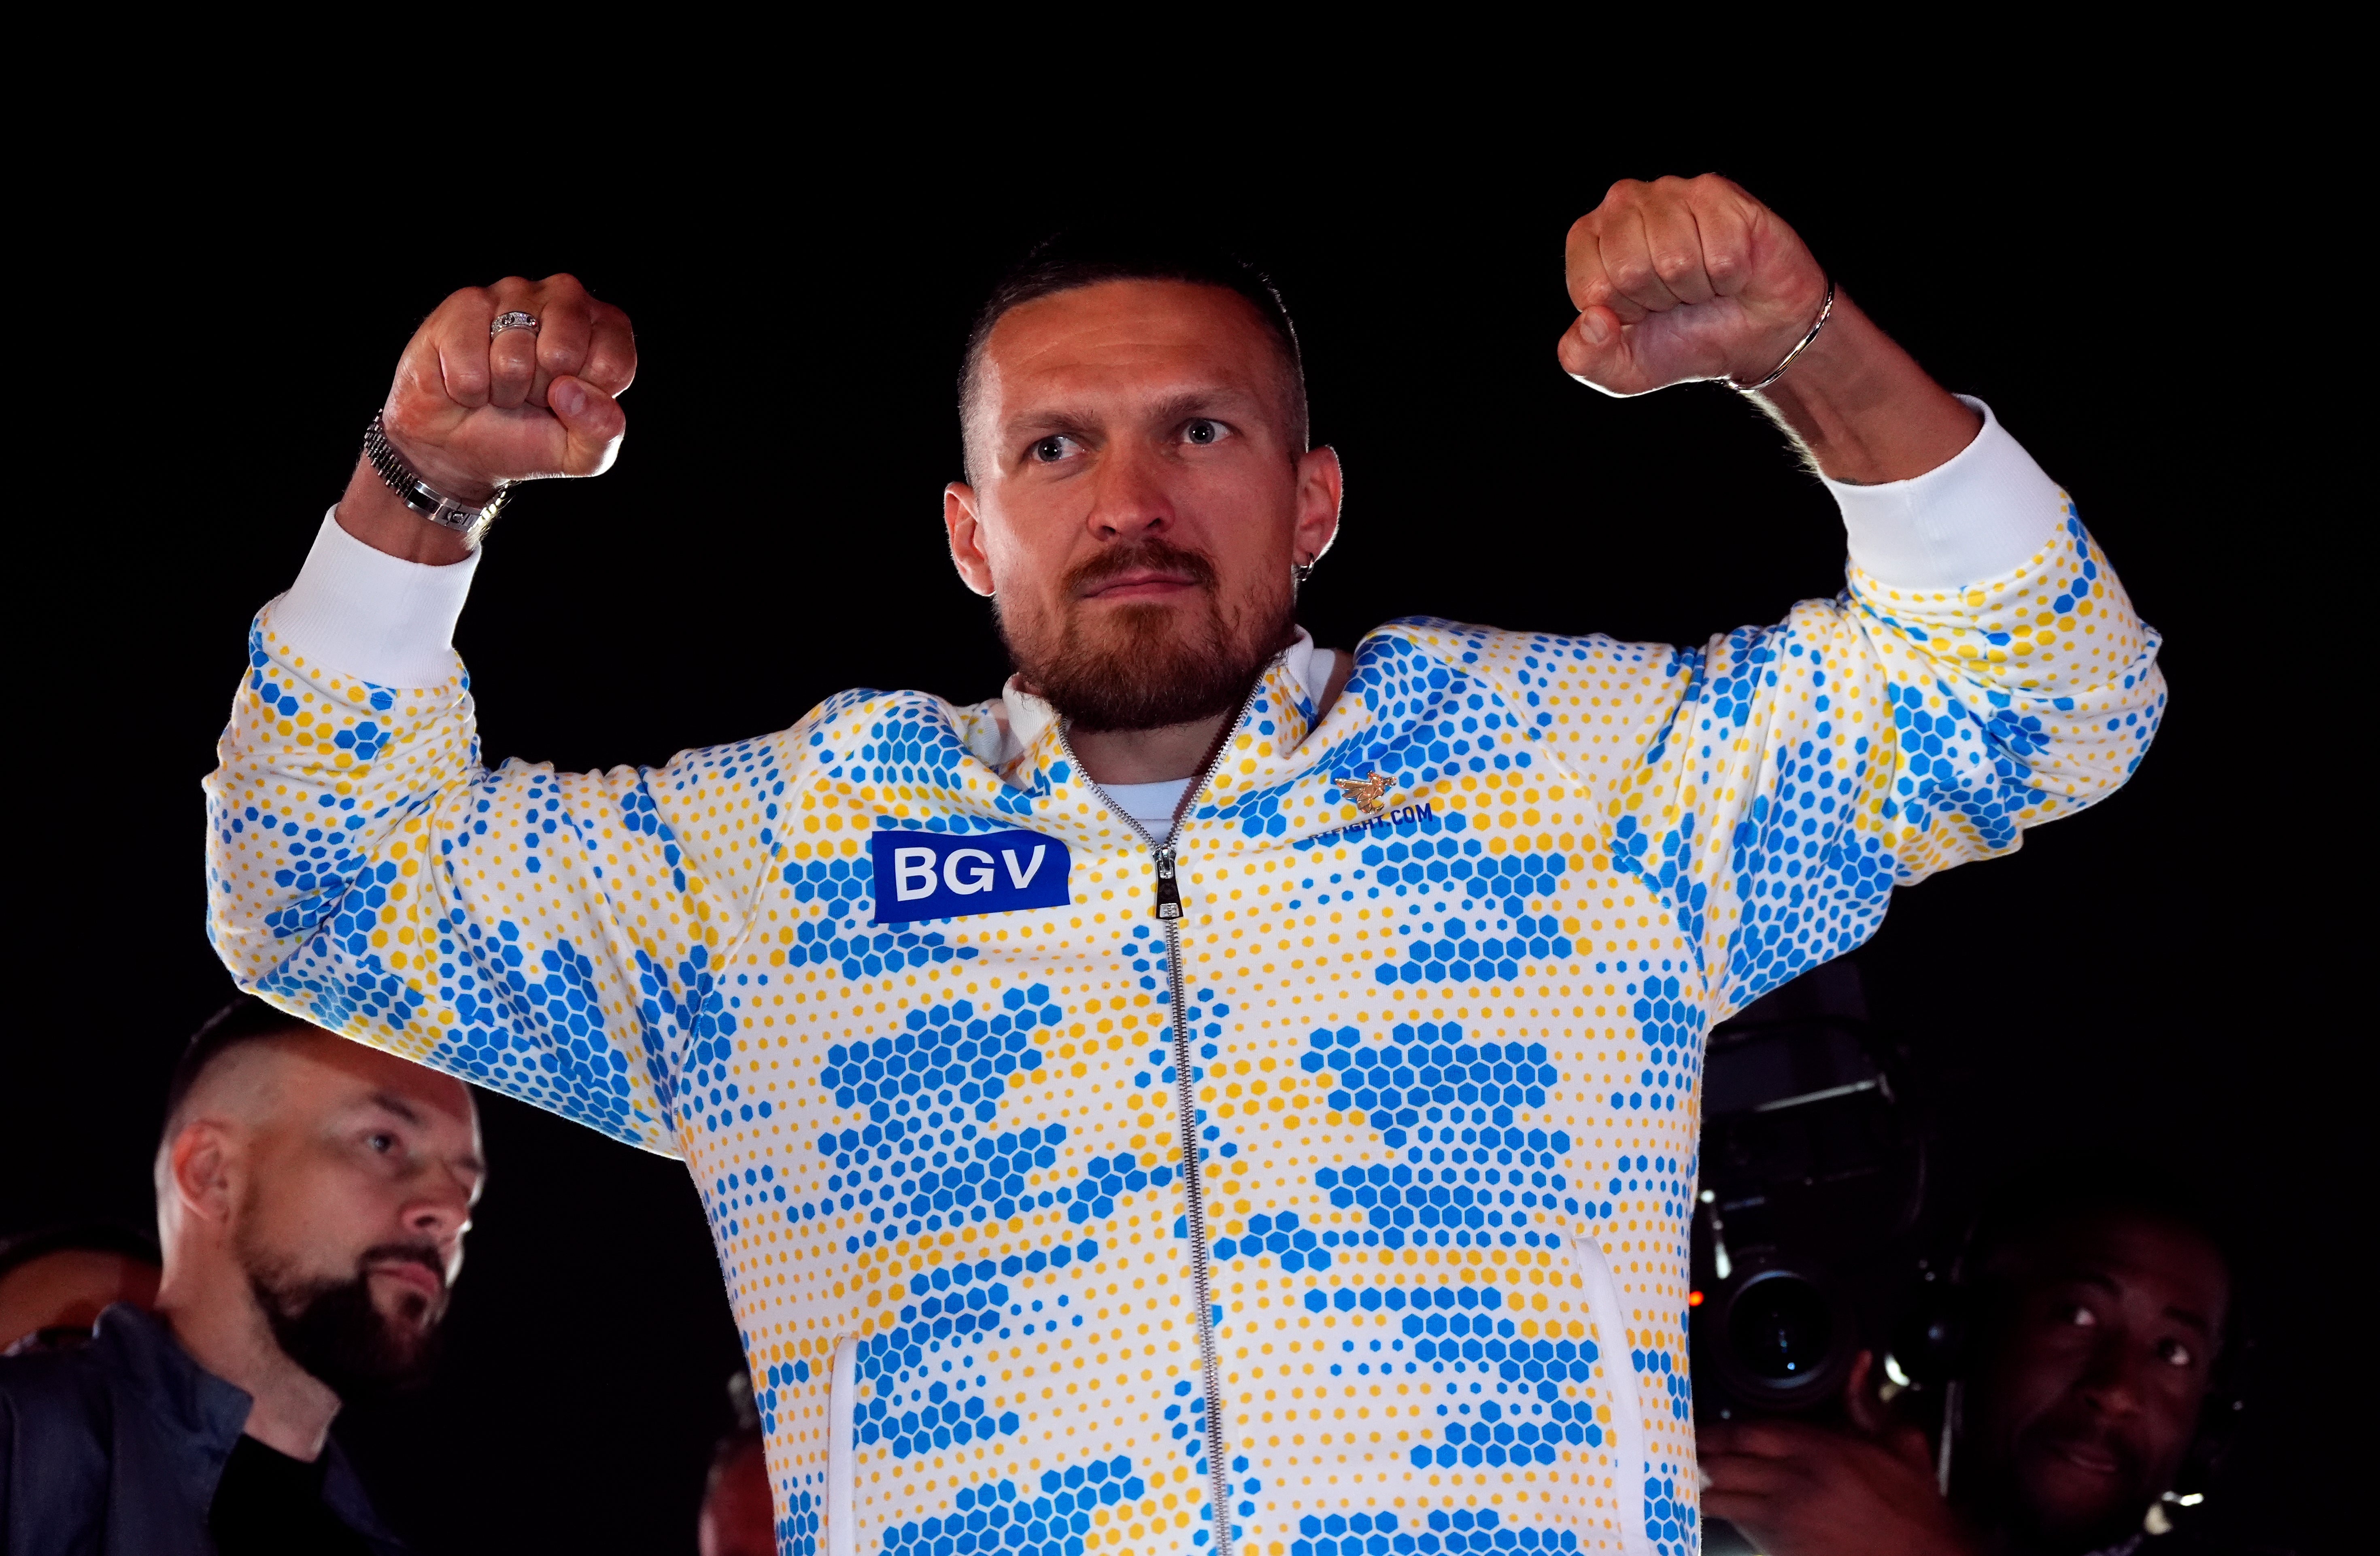 Oleksandr Usyk also arrived in style